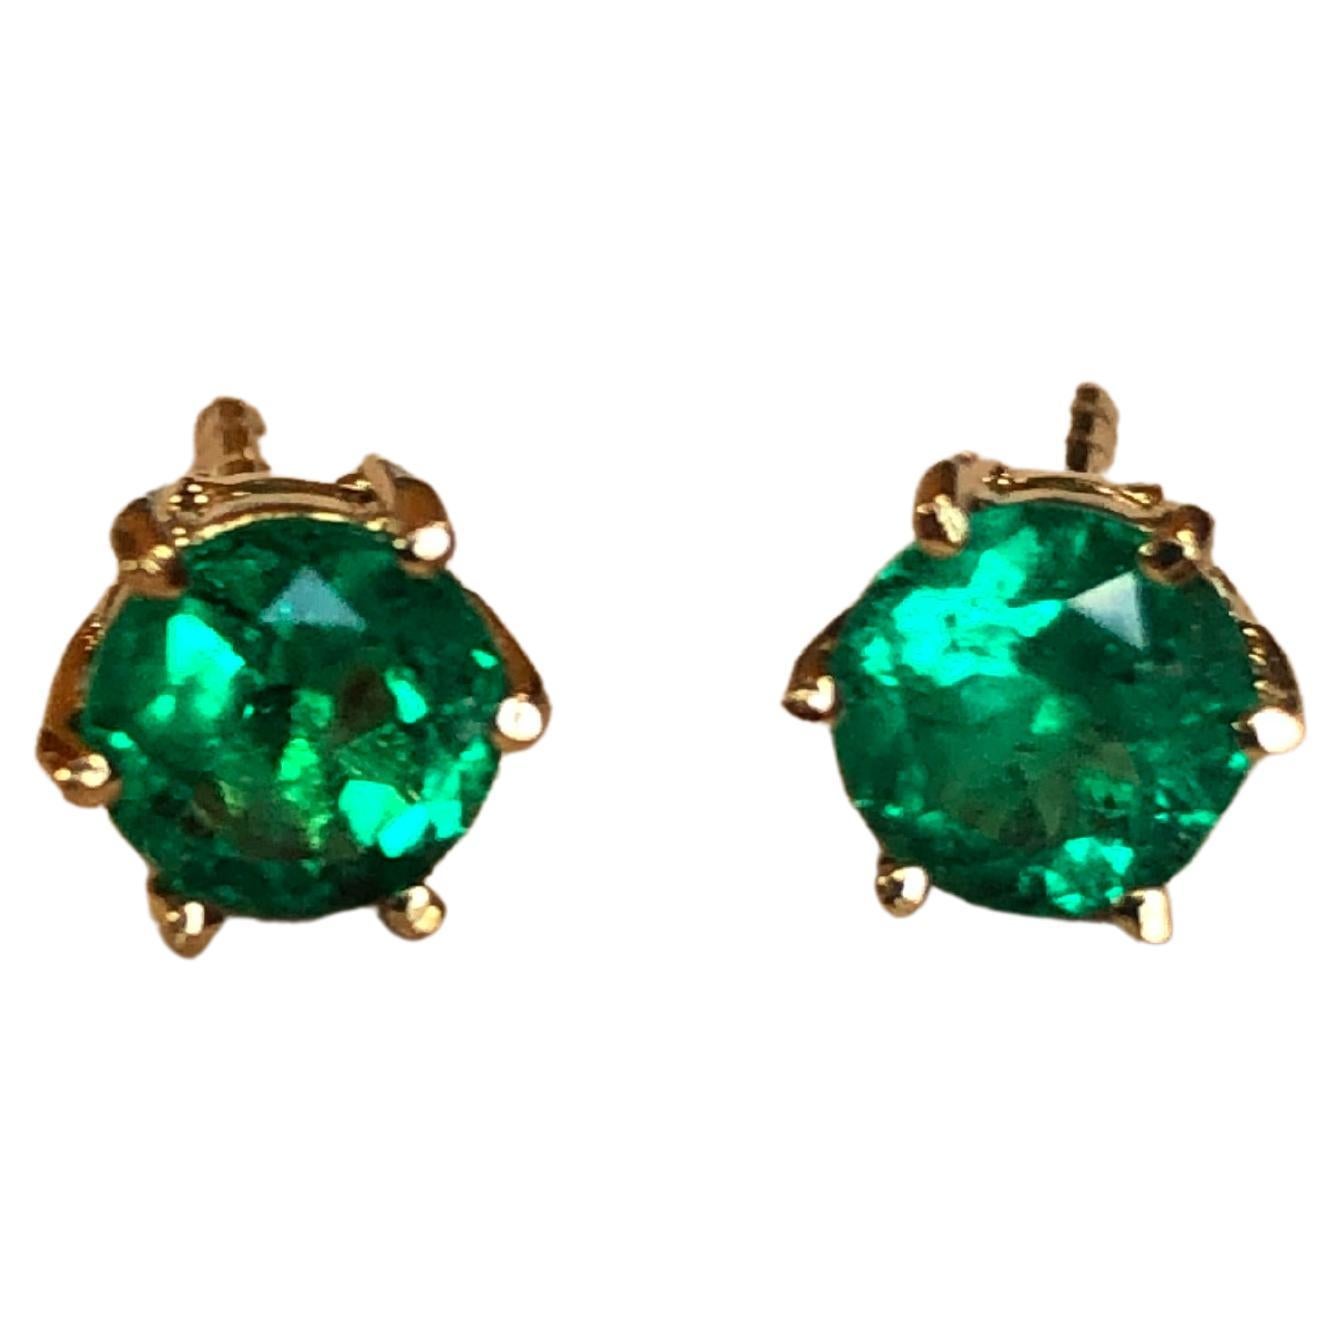 A beautiful fine pair of round-cut AAA natural emerald stud earrings set in 18k yellow gold.  Each earring solely features a sparkly green-colored round cut natural Colombian emerald, which is 6 prongs set open back setting.  The earrings measure